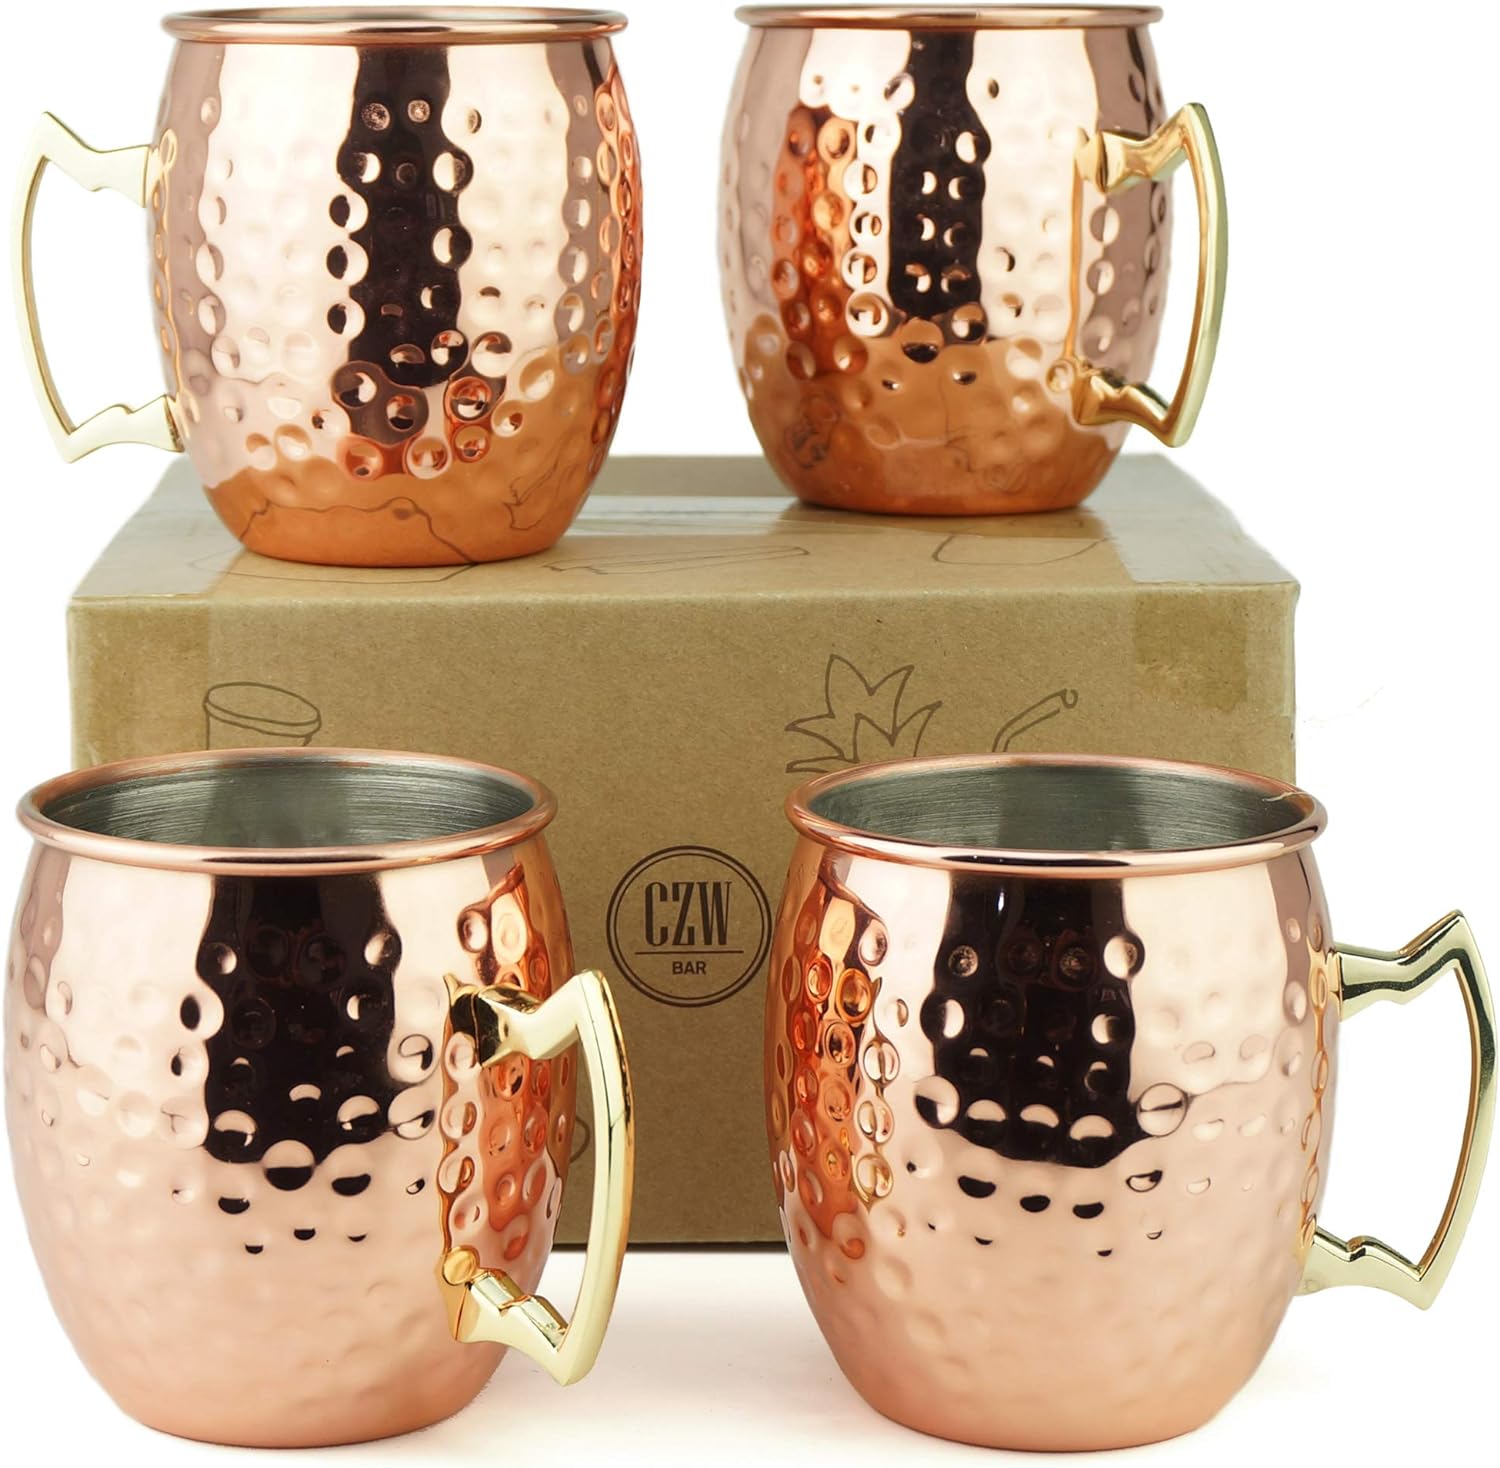 1x Moscow Mule Coffee Mug Drinking Cups Hammered Copper Brass Gift Set